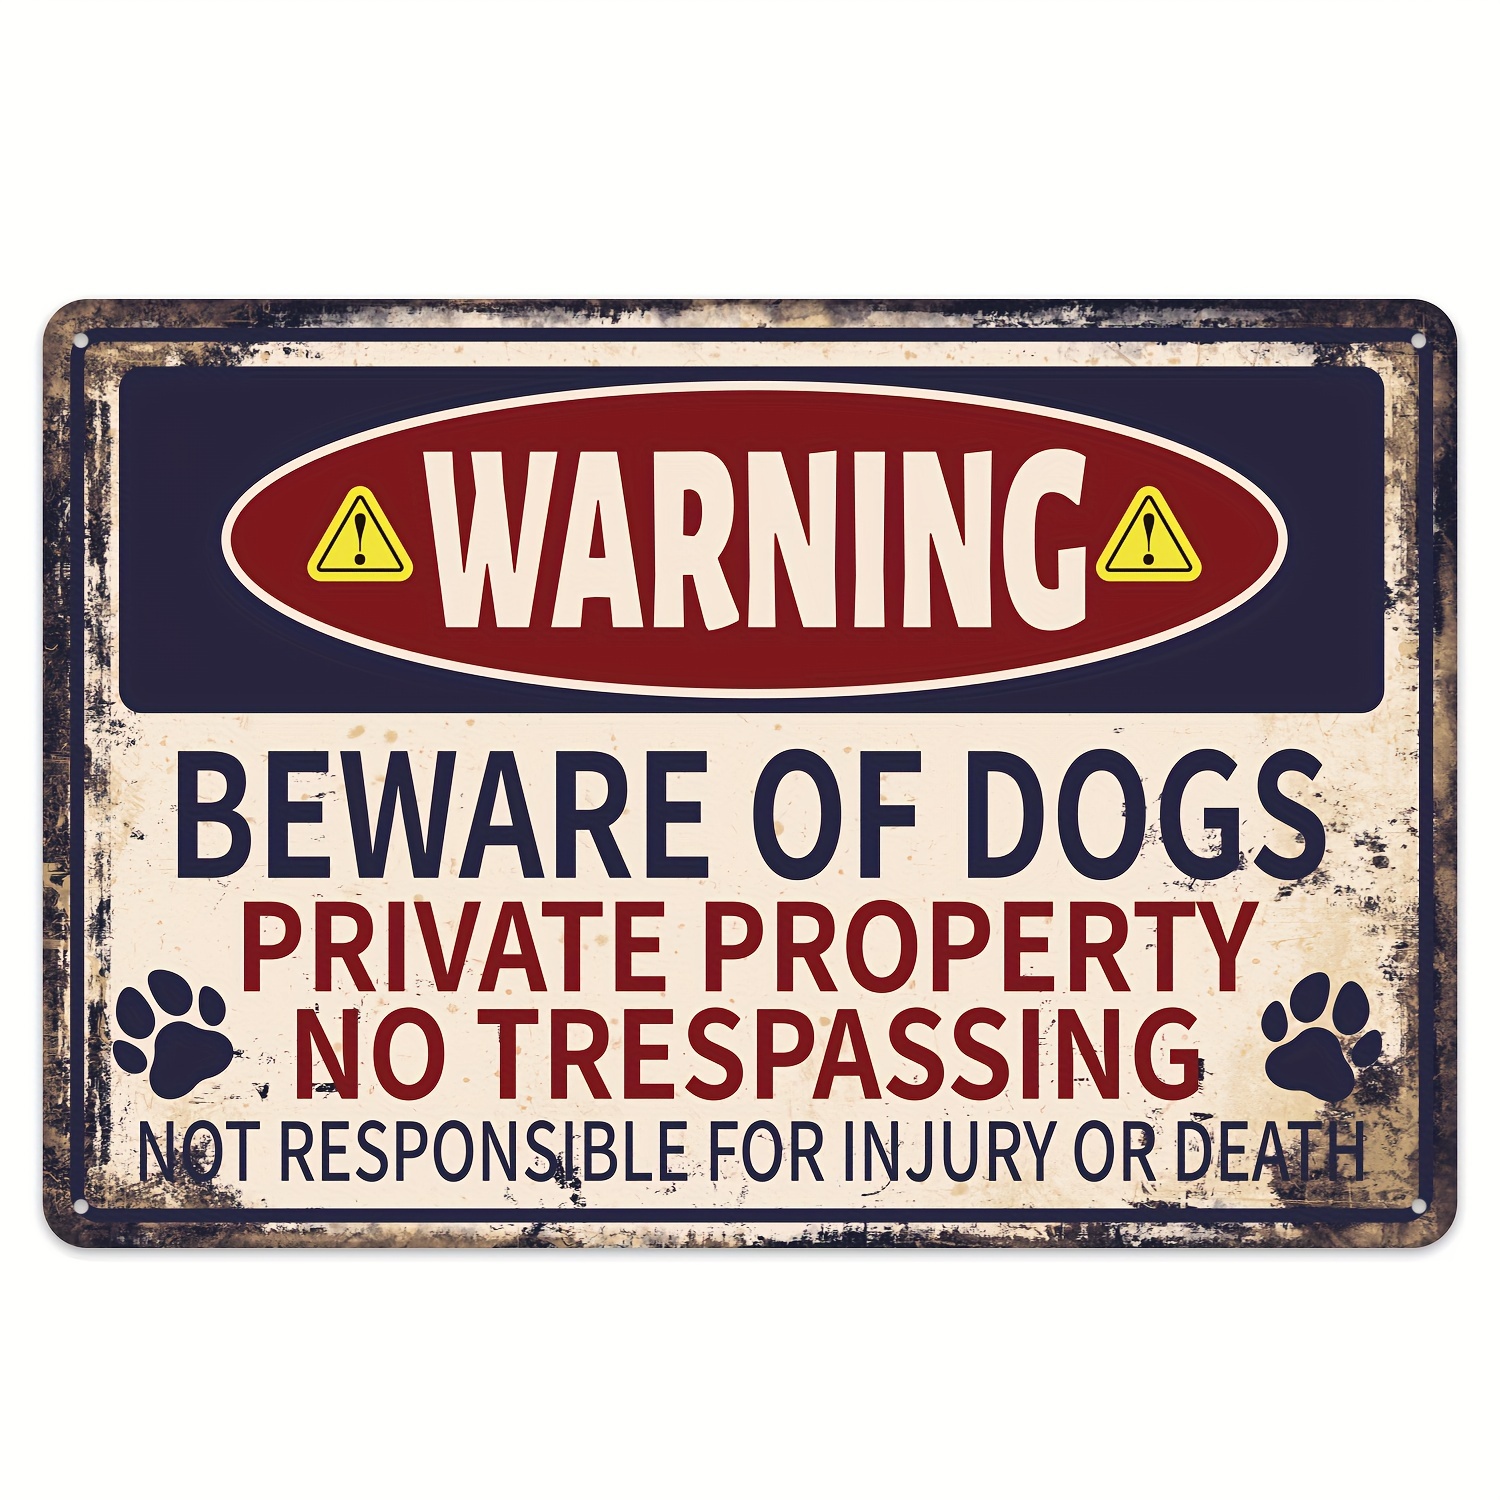 

1pc Dog Warning Sign, Beware Of Dogs Private Property No Trespassing, Not Responsible For Injury Or Death Metal Sign (20*30cm)